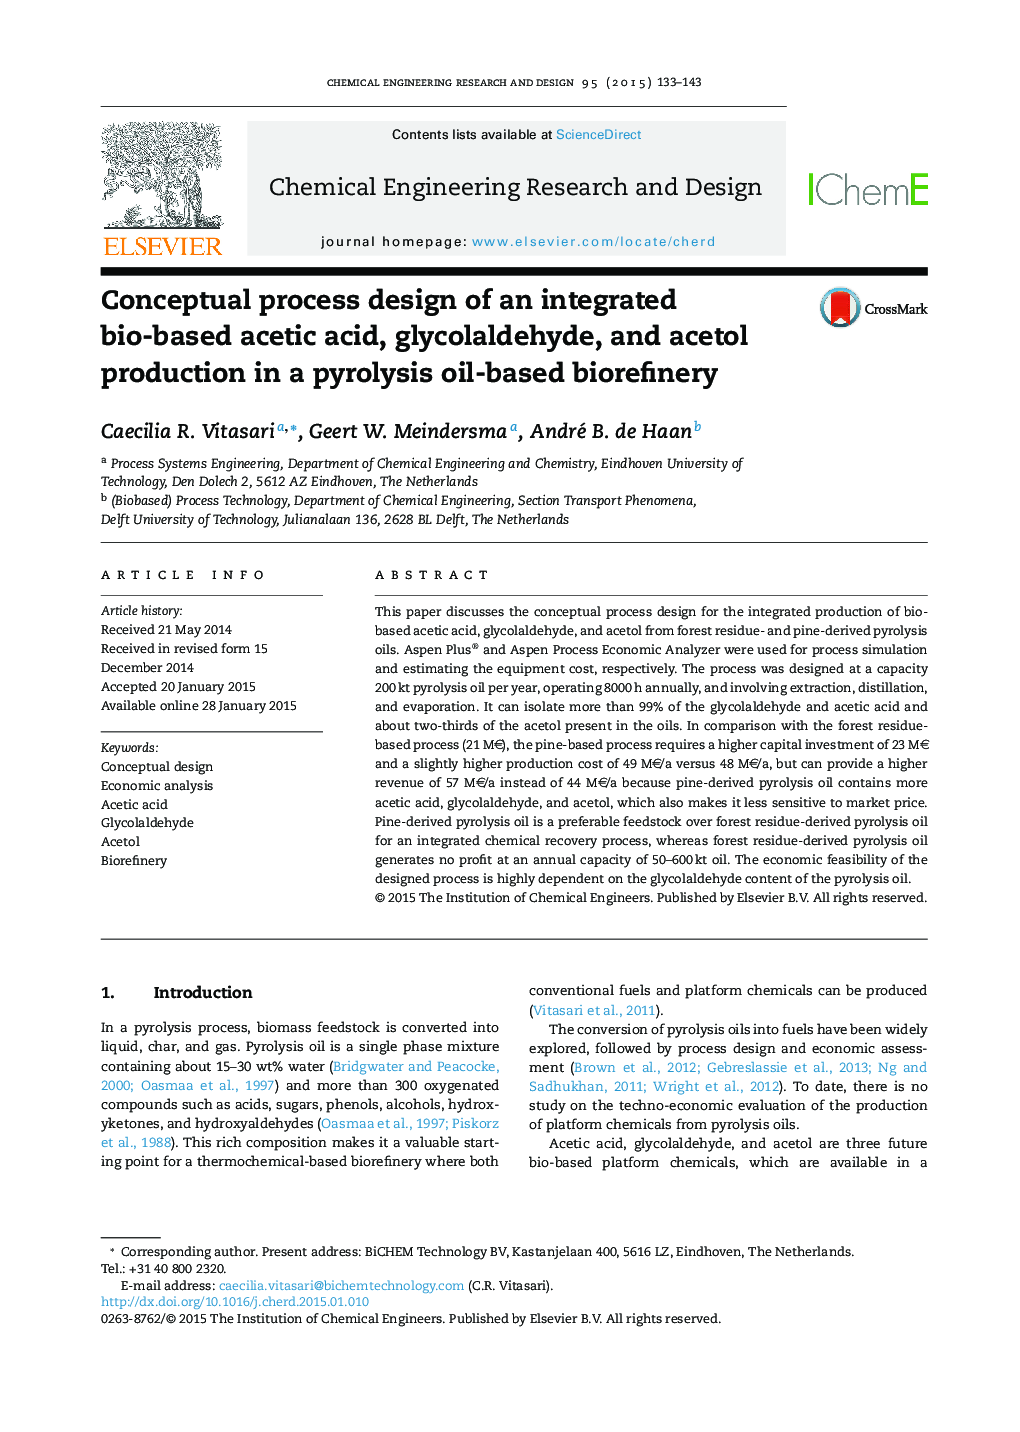 Conceptual process design of an integrated bio-based acetic acid, glycolaldehyde, and acetol production in a pyrolysis oil-based biorefinery